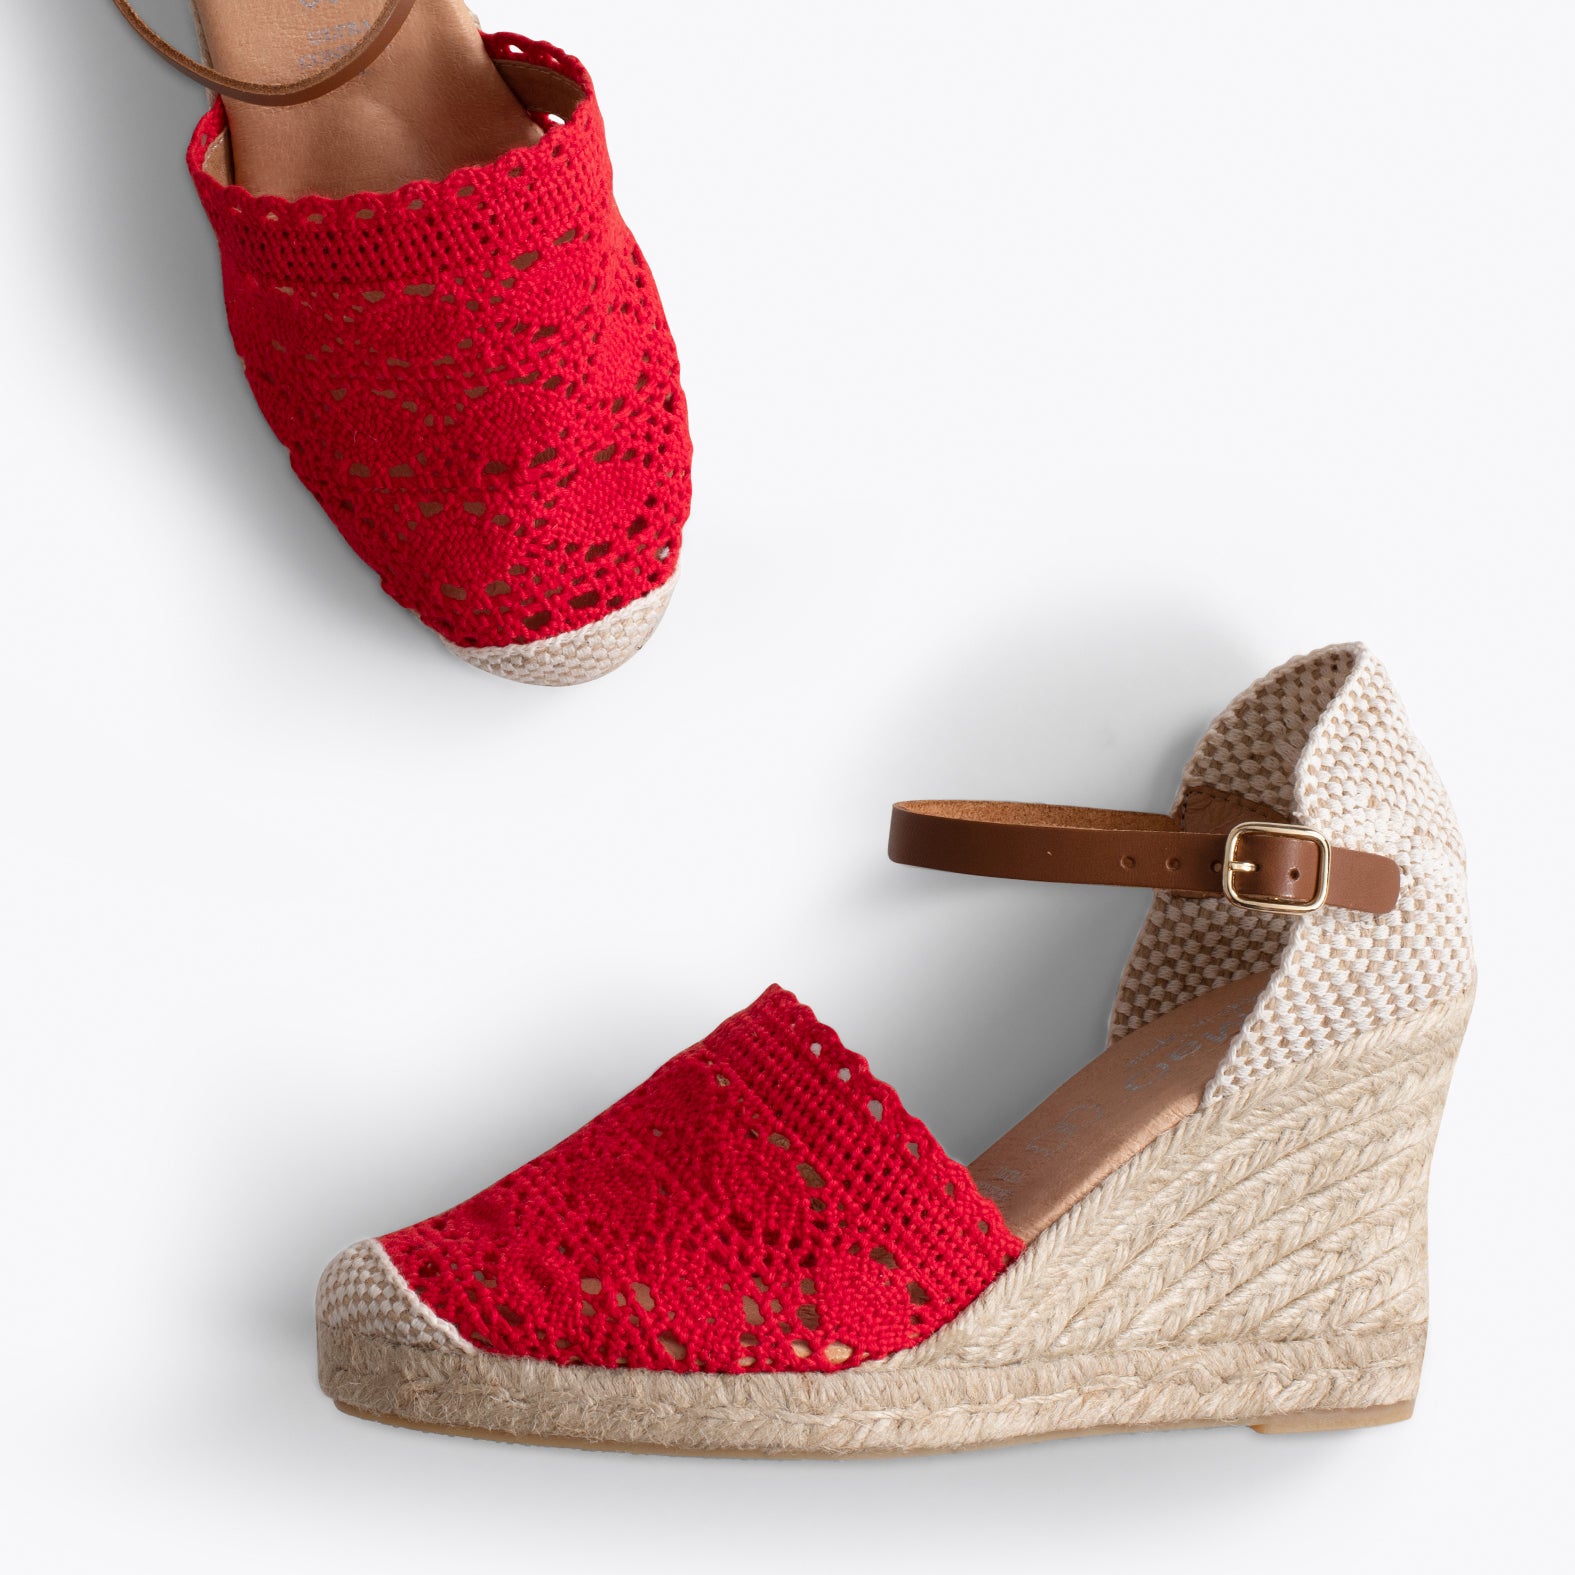 IBIZA – RED crocheted espadrilles